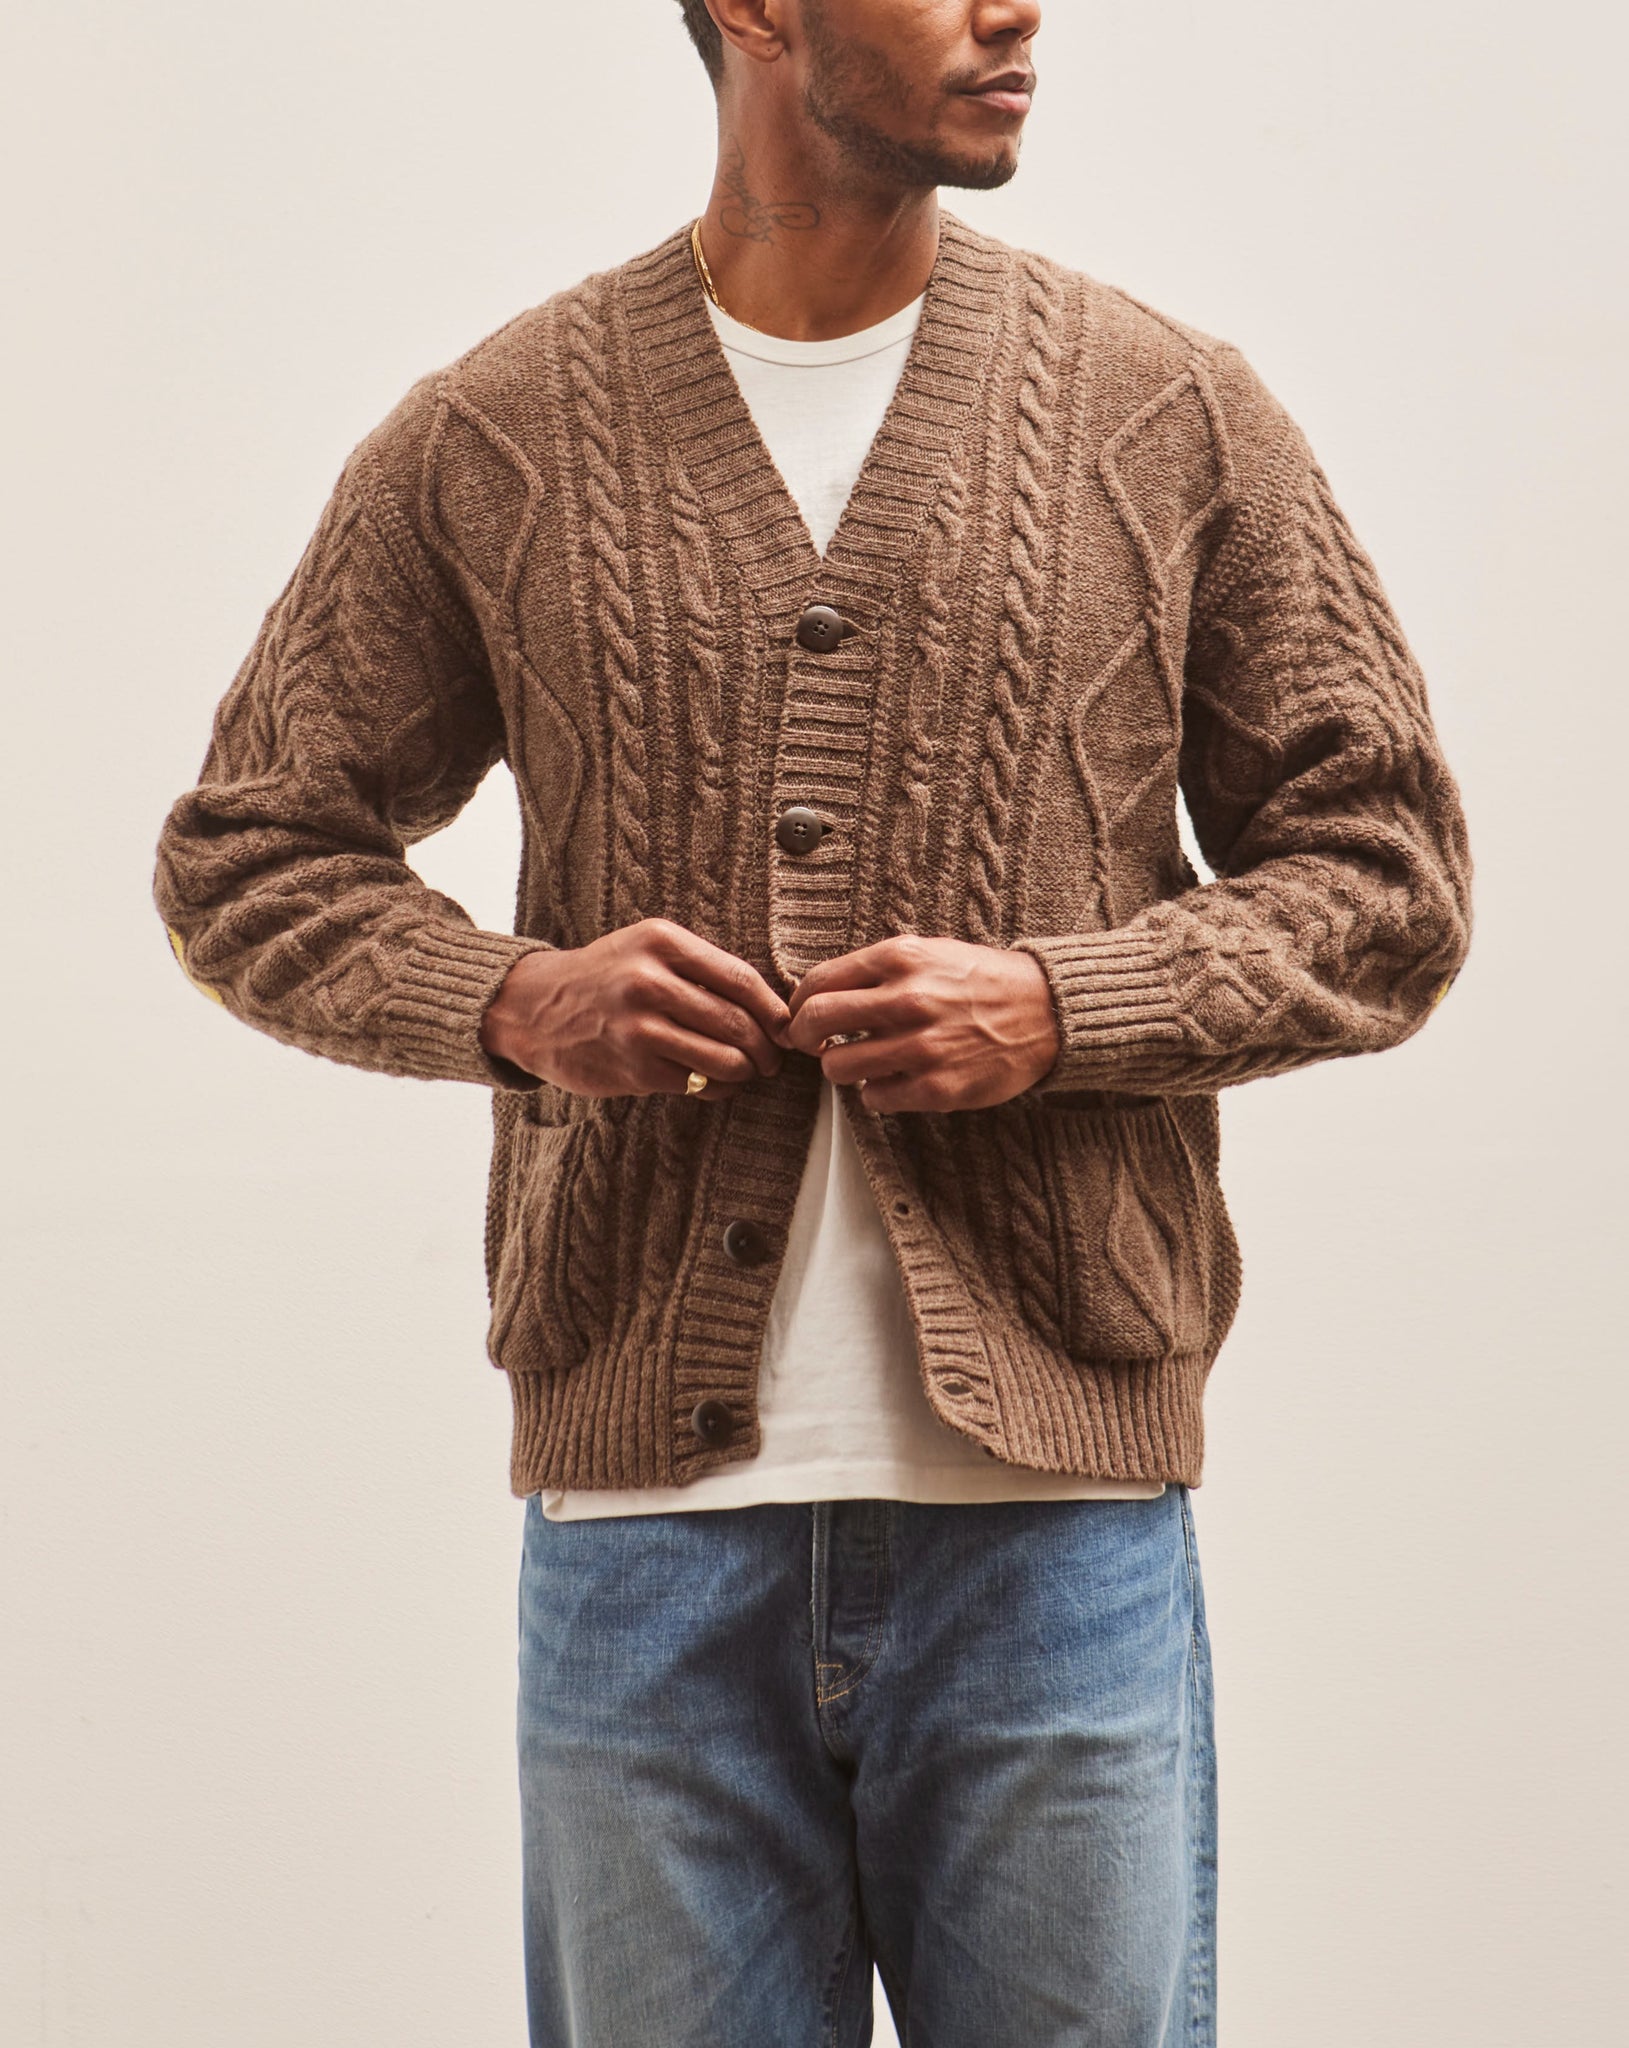 Kapital Unisex 5G Wool Cable Knit Elbow CATPITAL Cardigan, Moca Brown